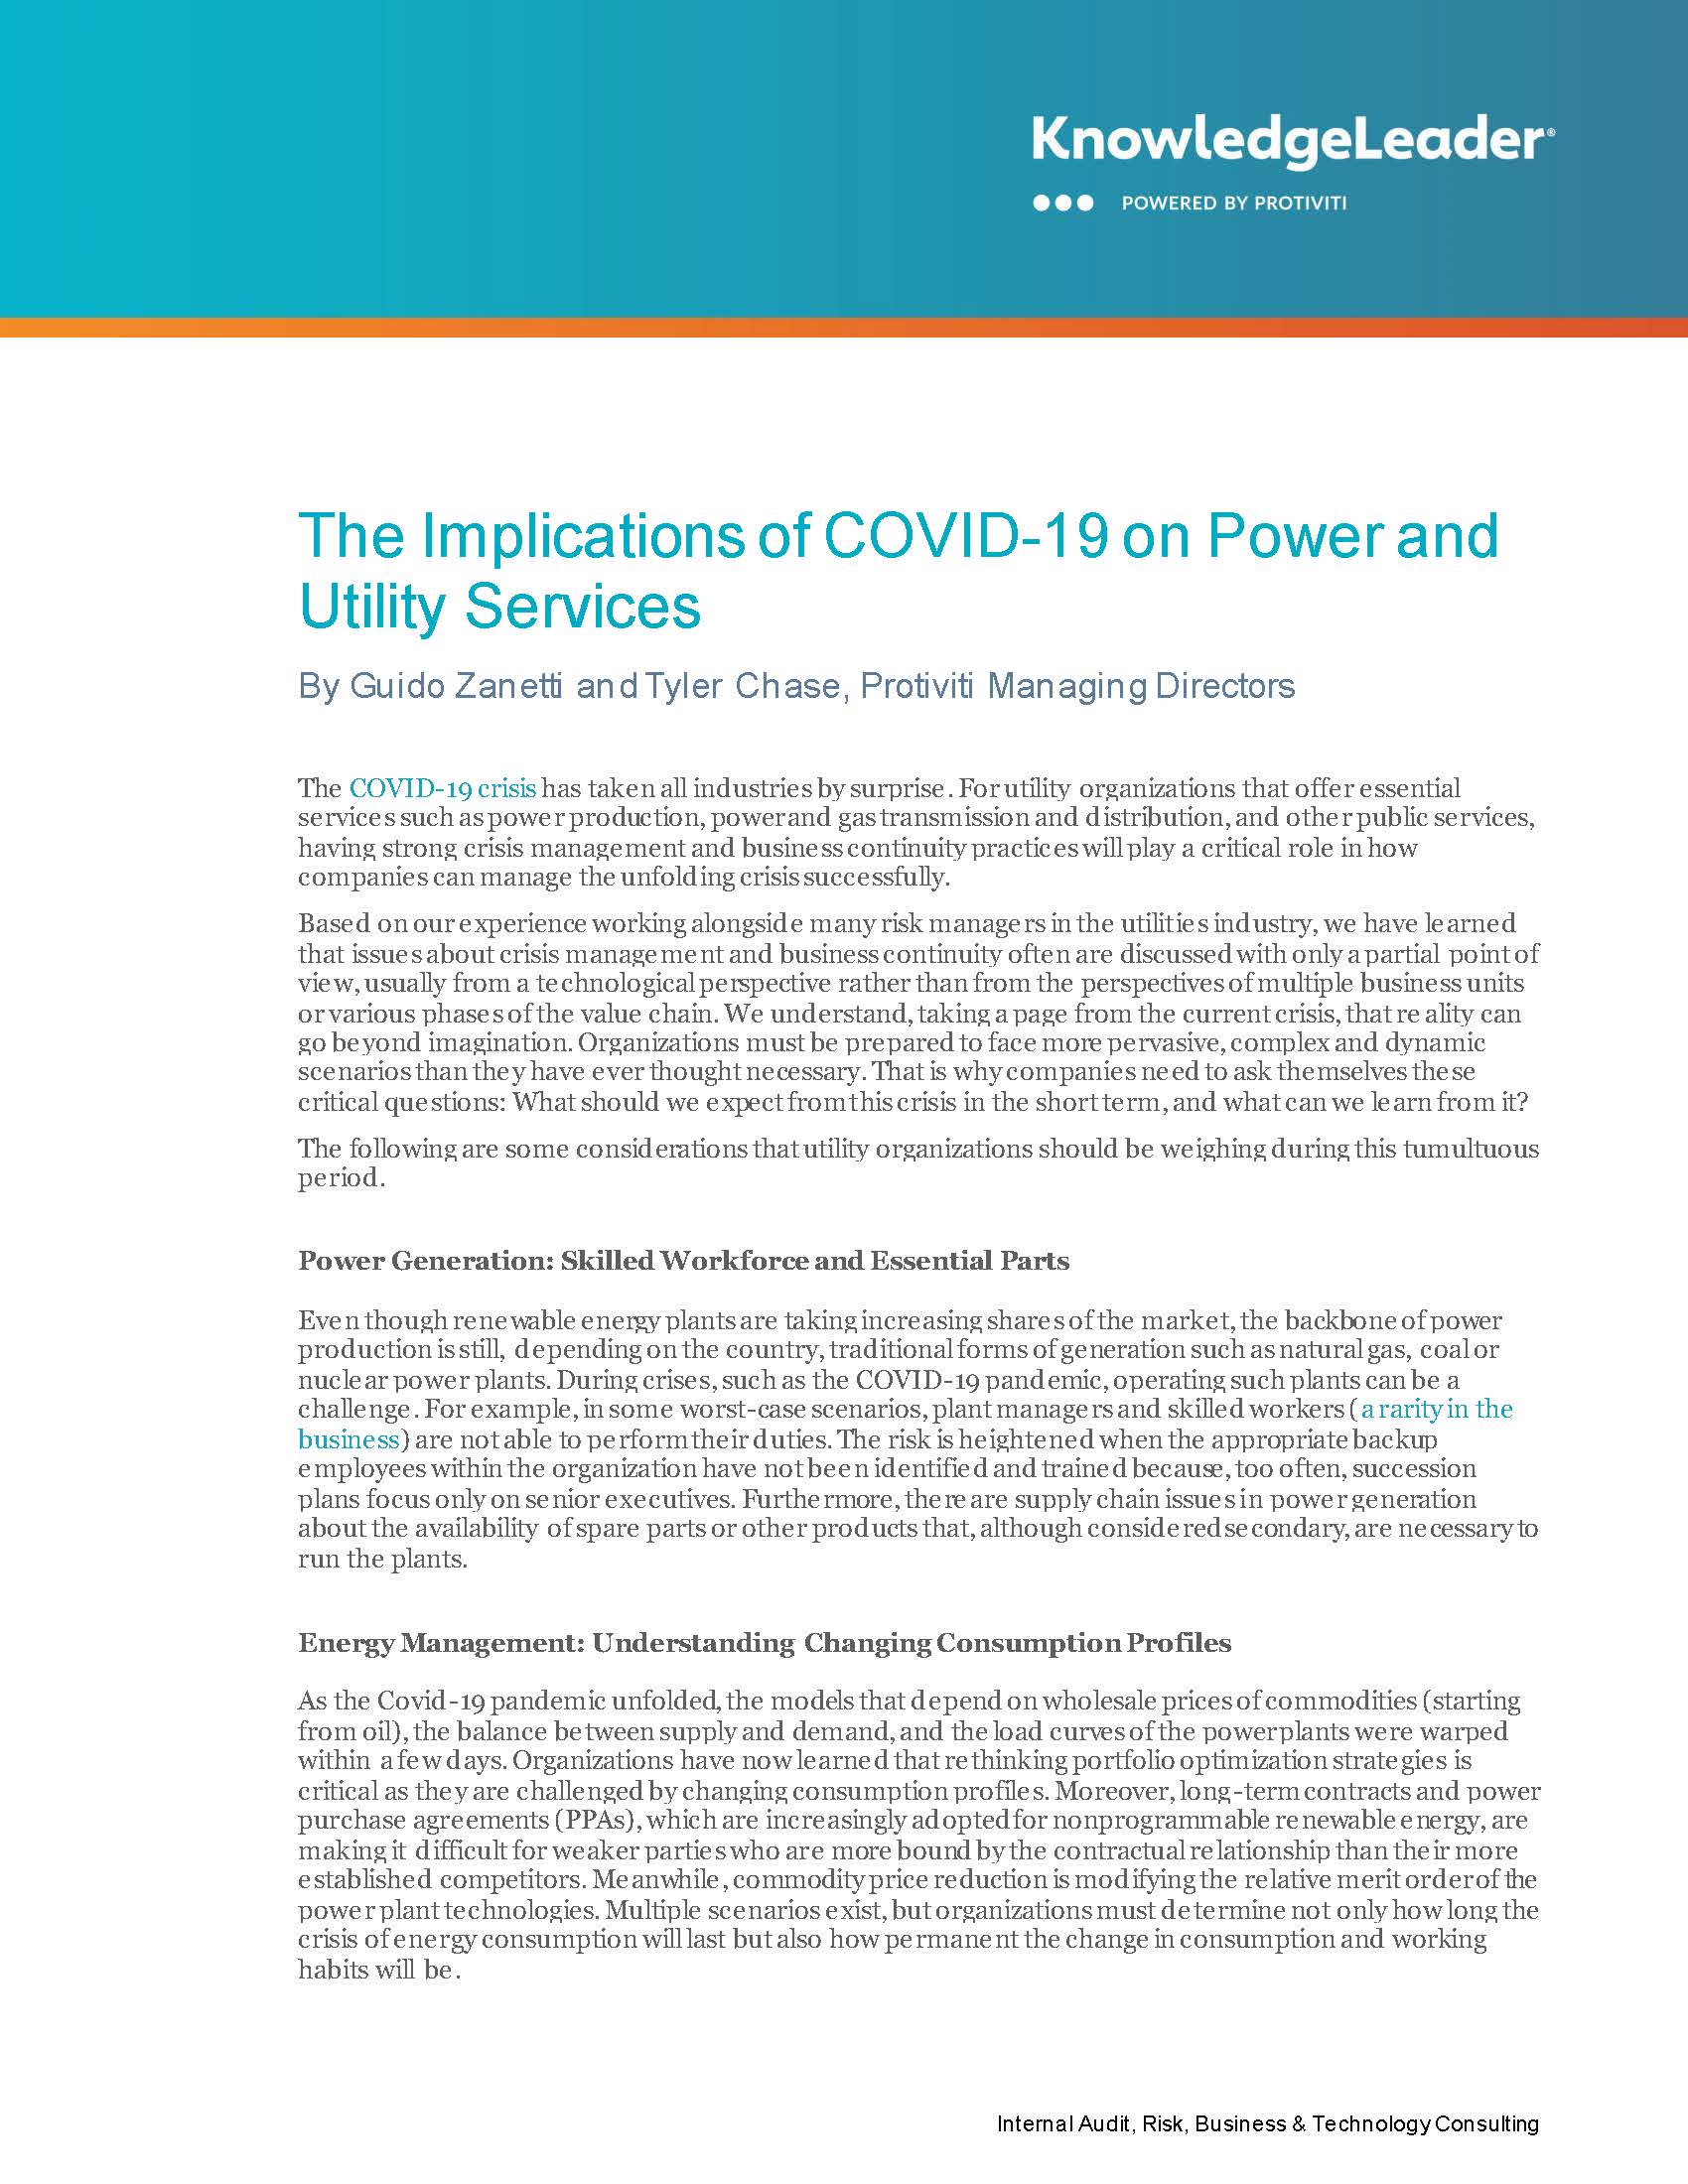 The Implications of COVID-19 on Power and Utility Services